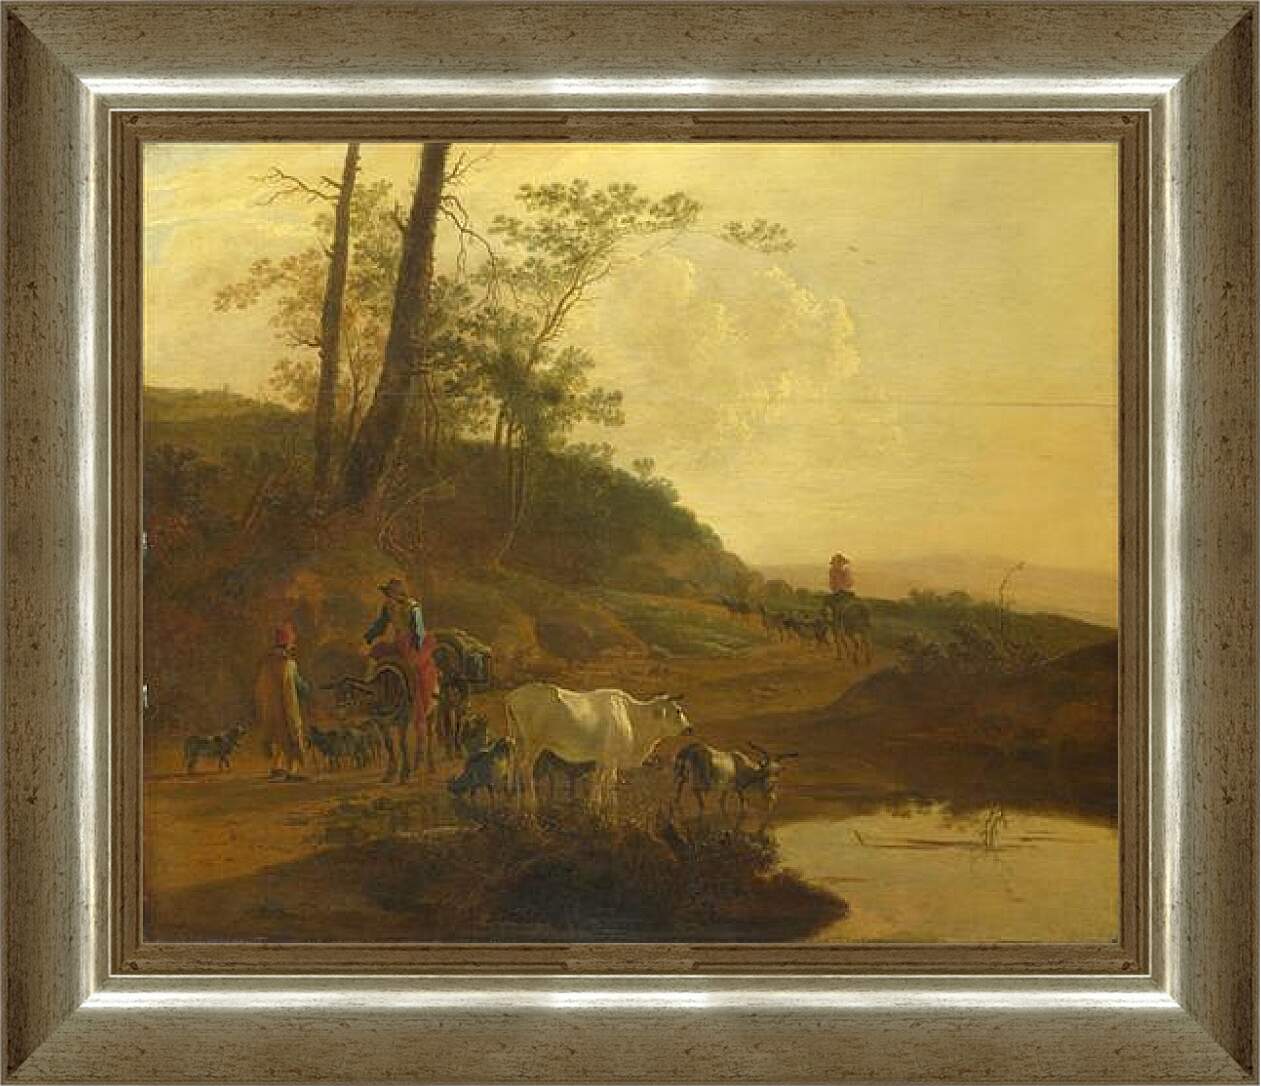 Картина в раме - Men with an Ox and Cattle by a Pool. Ян Бот